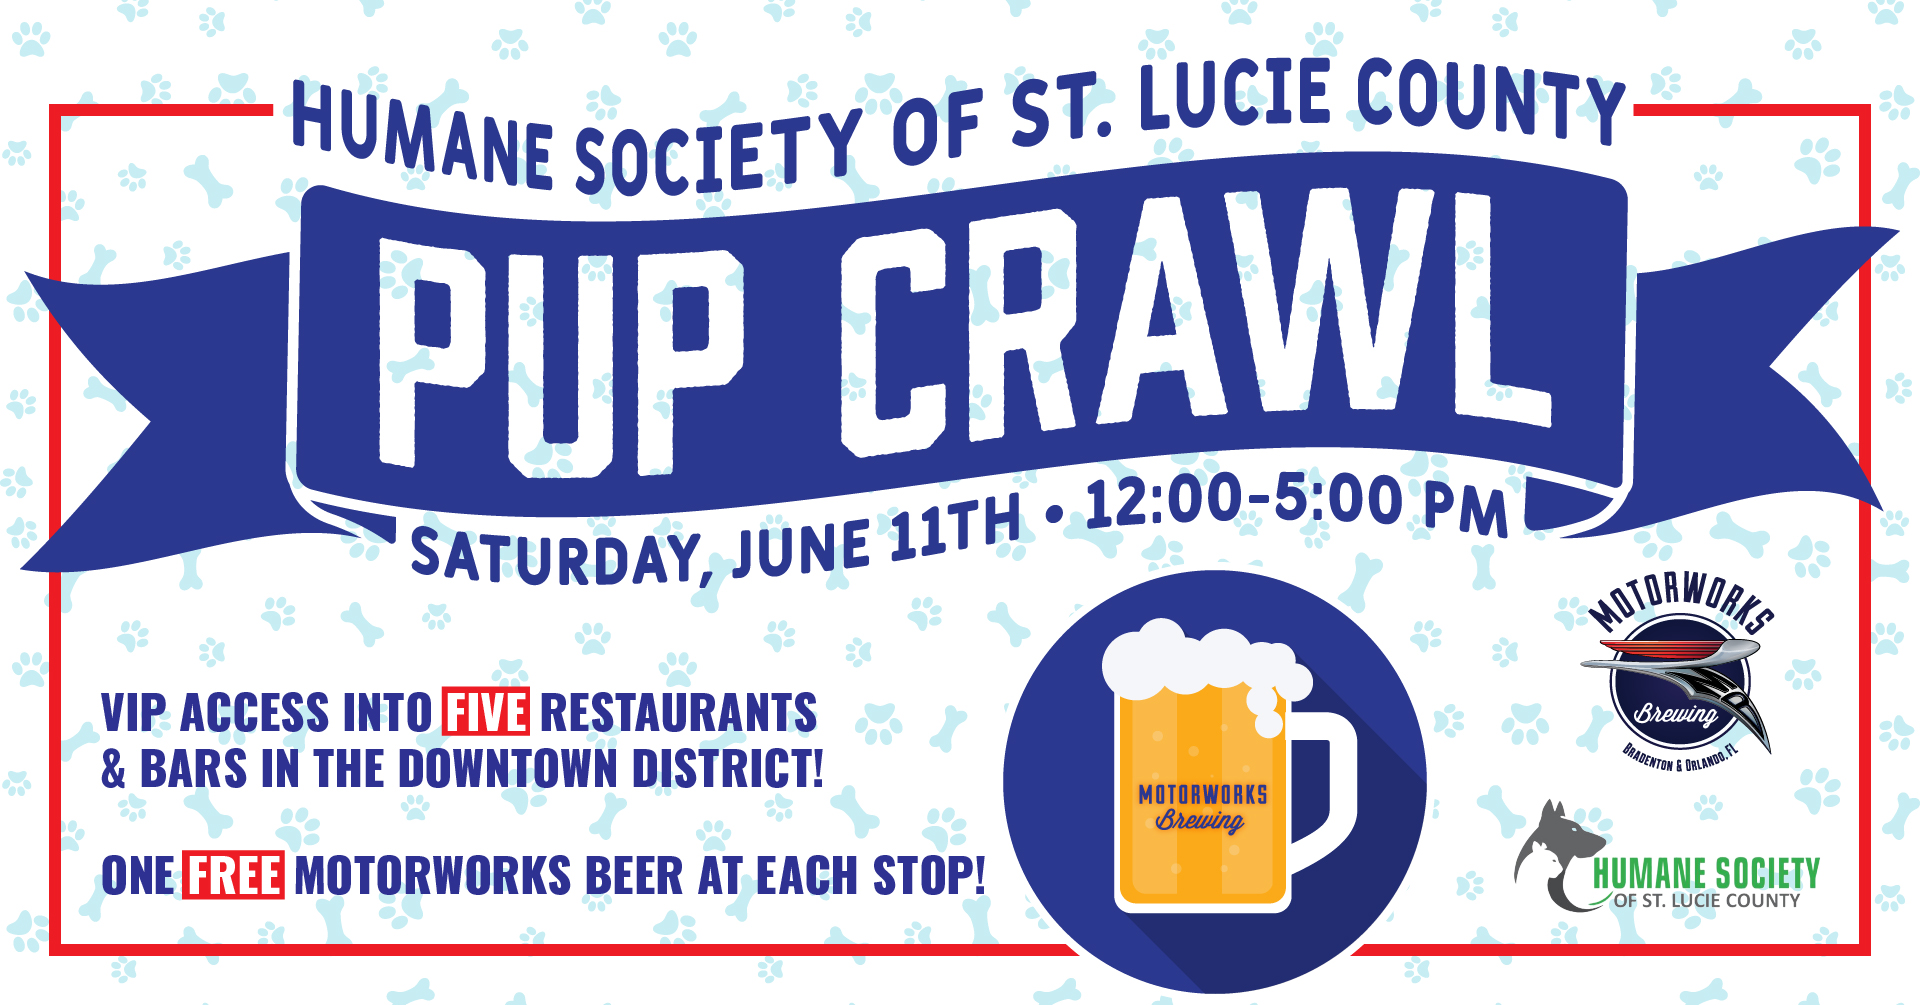 Humane Society of St. Lucie County Pup-Crawl